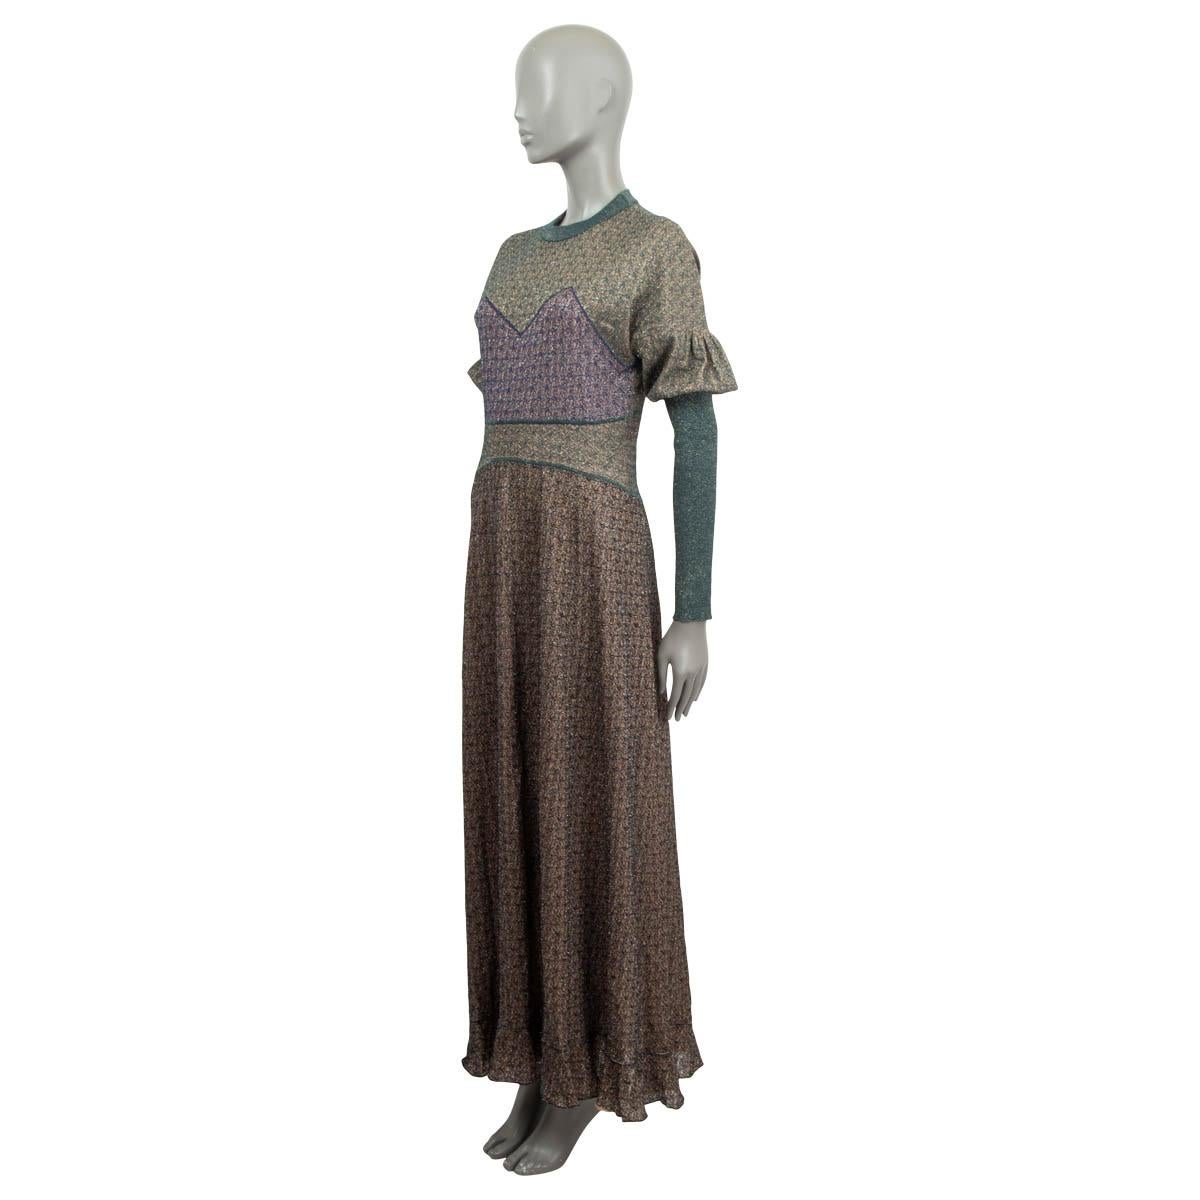 100% authentic Chloé knitted maxi dress in shiny blue, purple, green and nude viscose (44%), cotton (37%), metallic fibers (11%) and polyamide (8%). Features long puffed raglan sleeves (sleeve measurements taken from the neck) and a ruffled hem.